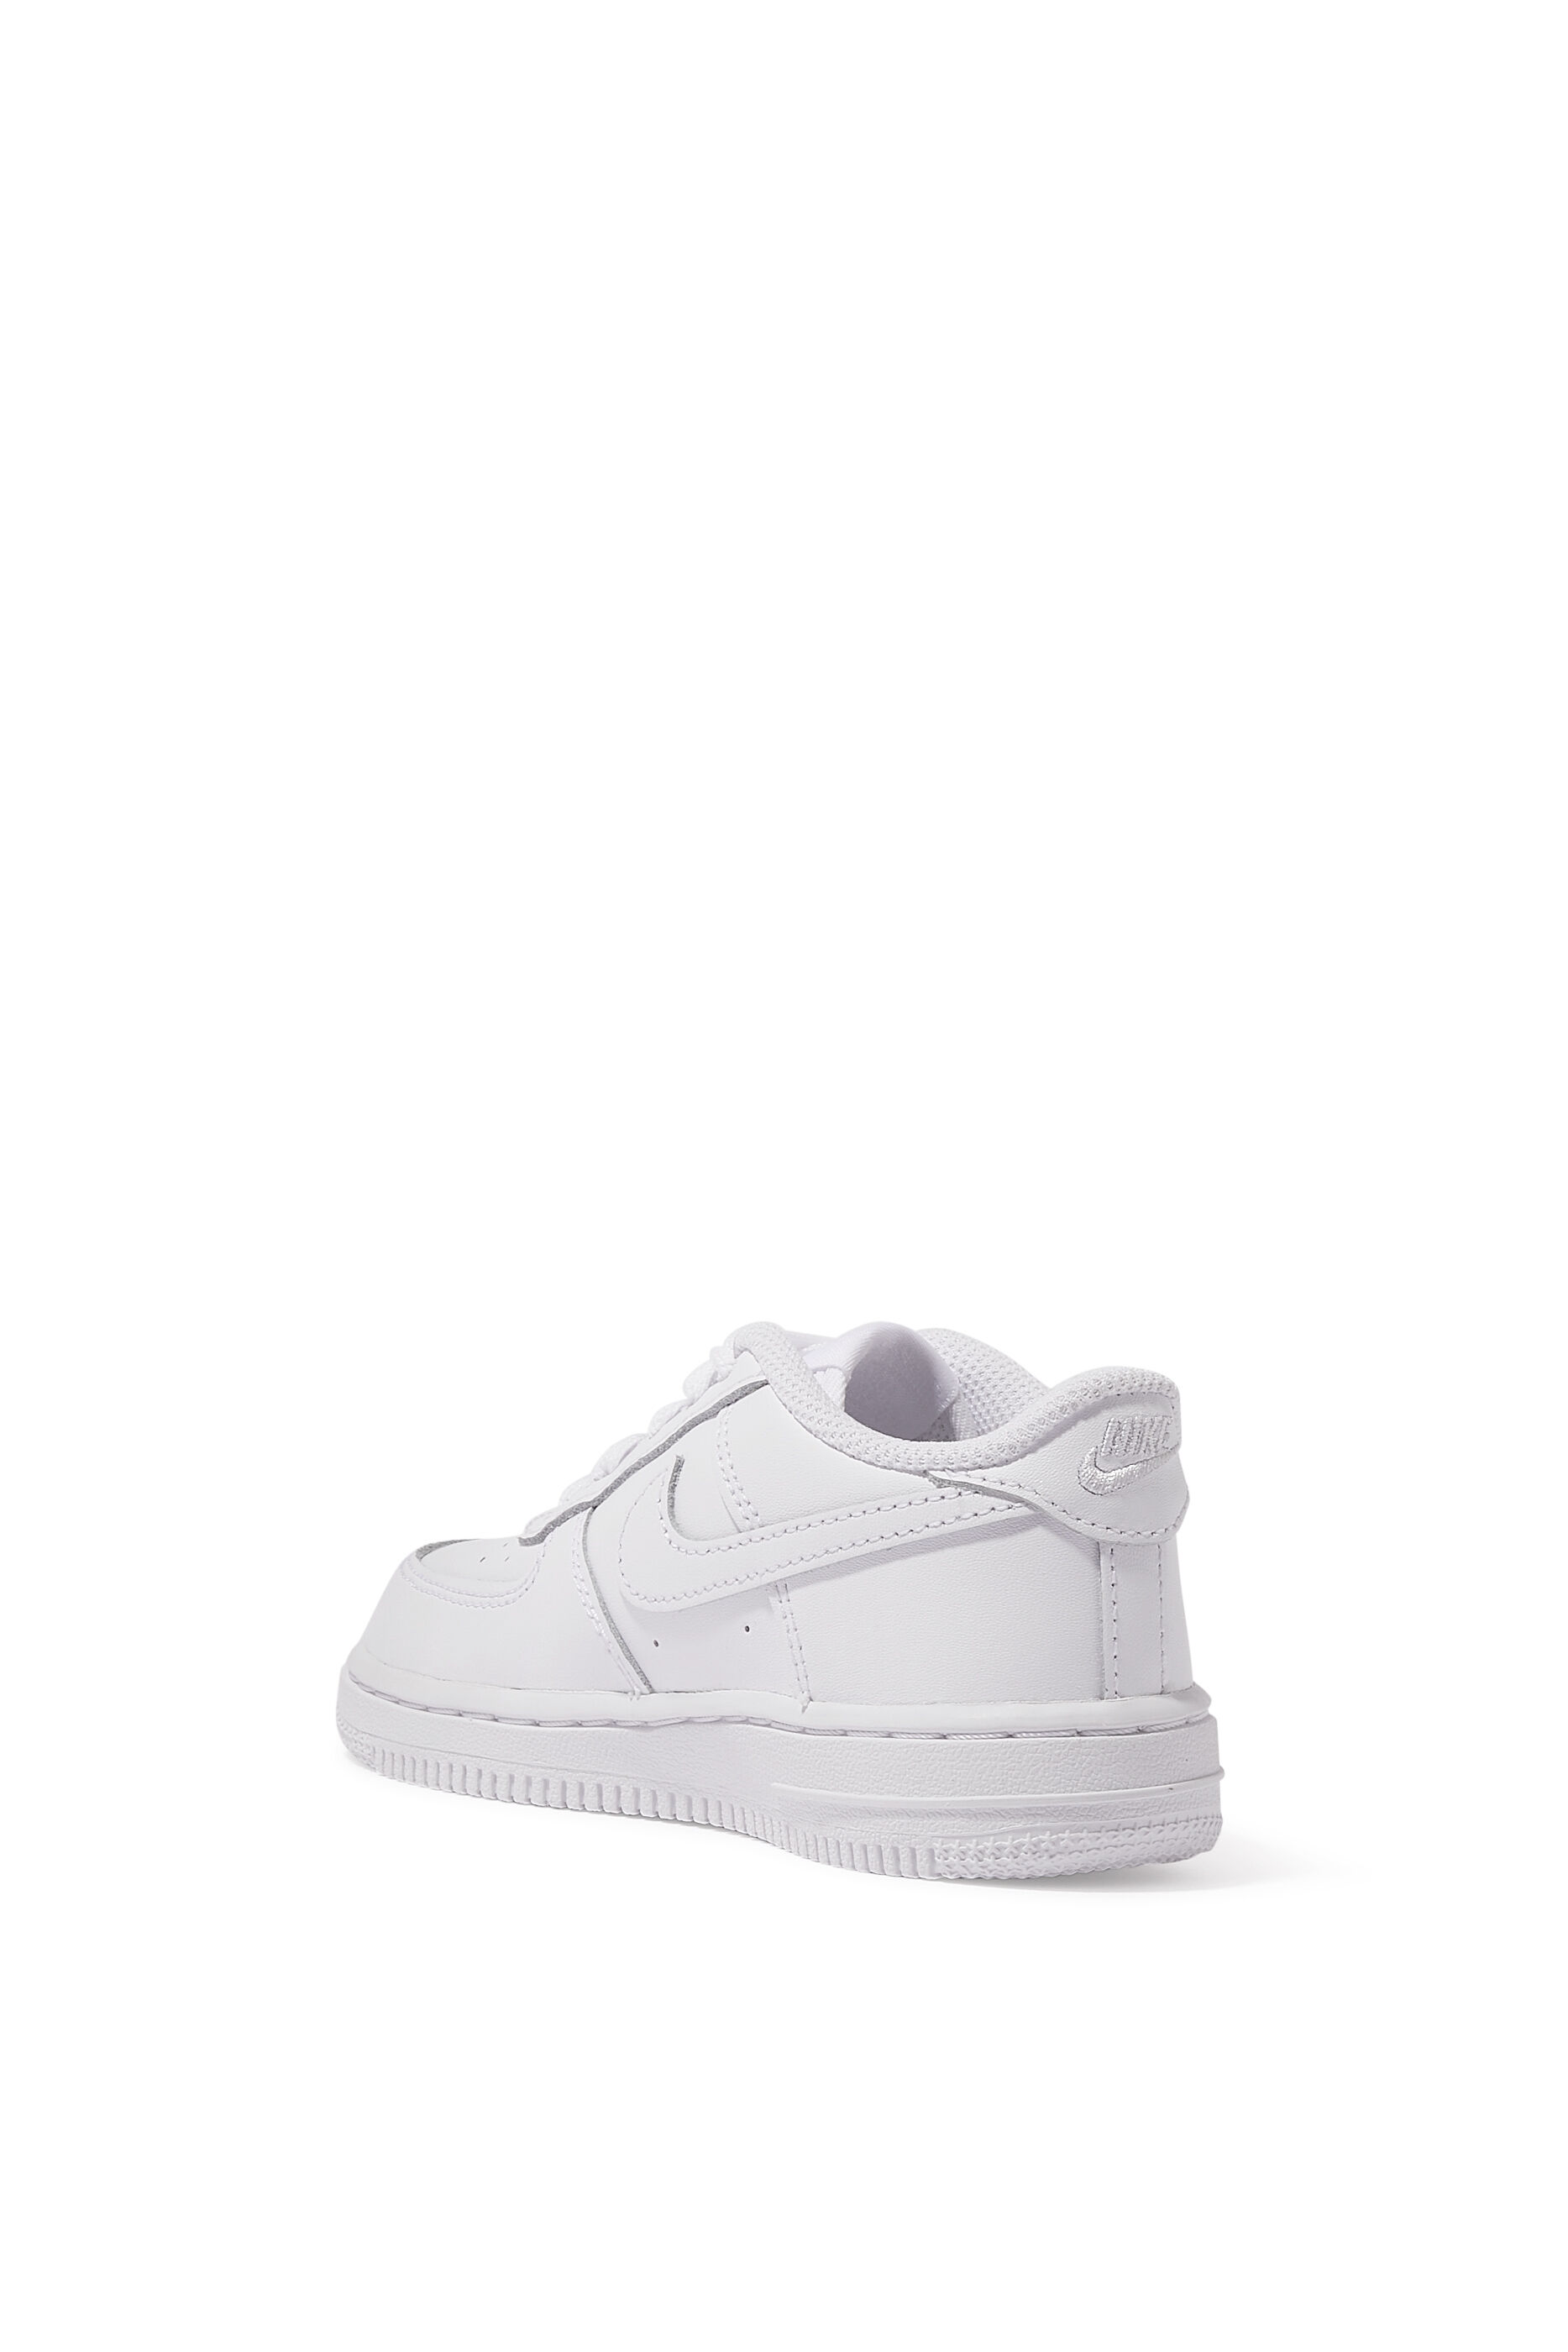 toddler high top air force ones